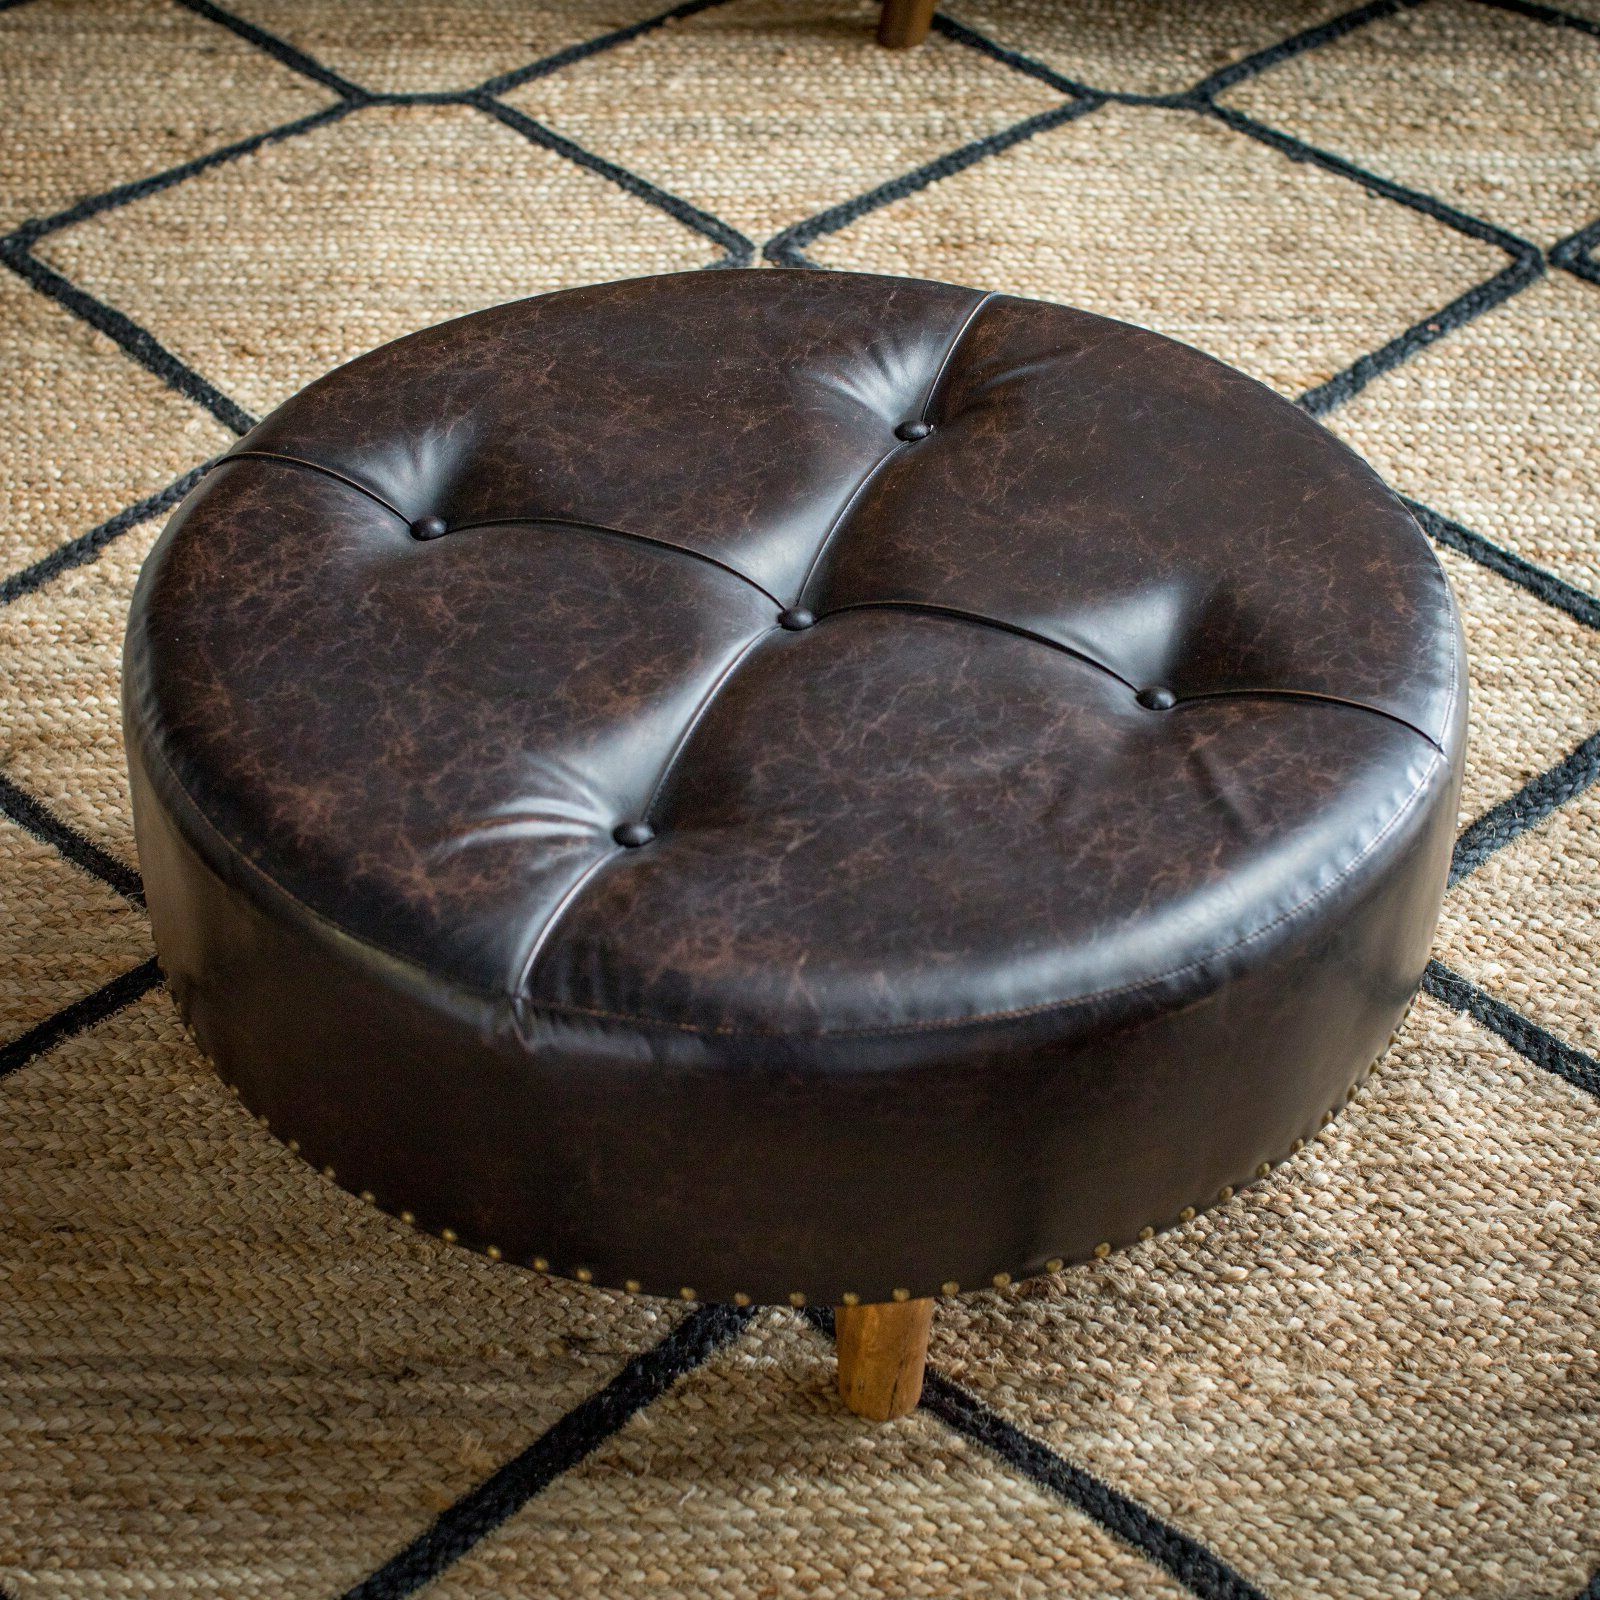 Newest Round Beige Faux Leather Ottomans With Pull Tab In Weathered Brown Faux Leather 31" Round Cocktail Ottoman Foot Stool W (View 7 of 10)